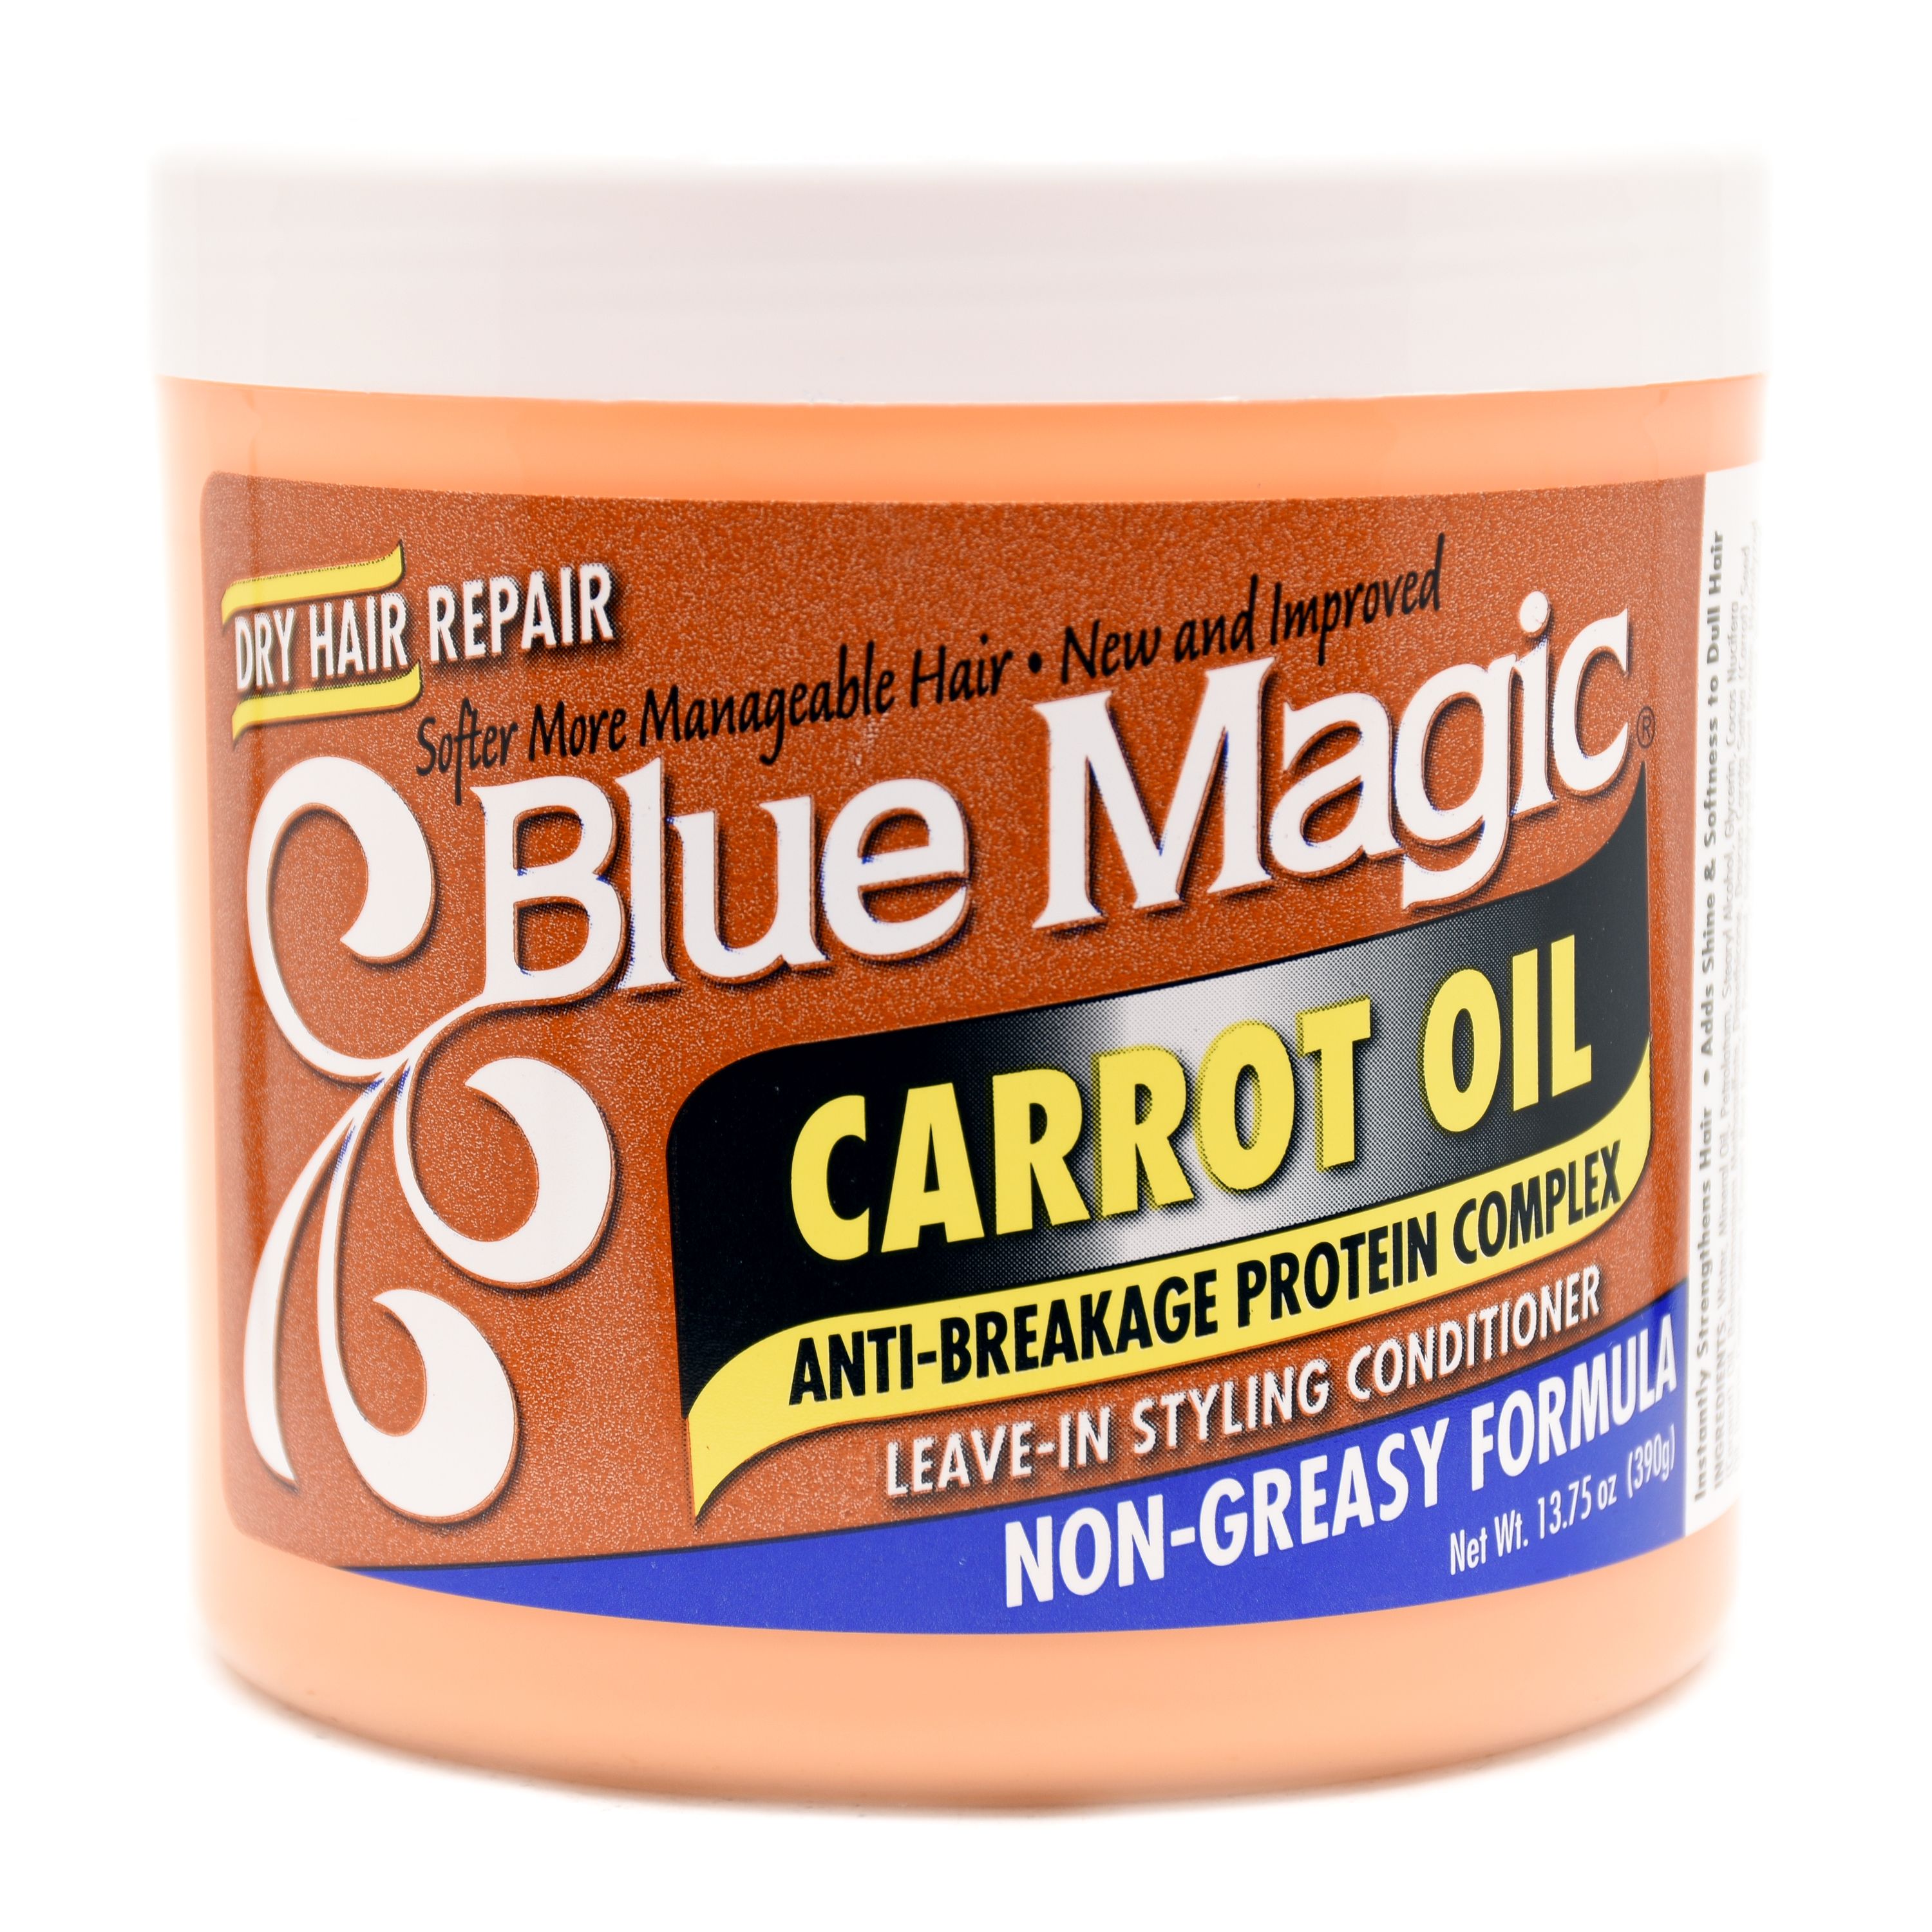 Blue Magic Carrot Oil Leave-in Styling Conditioner - 13.75oz